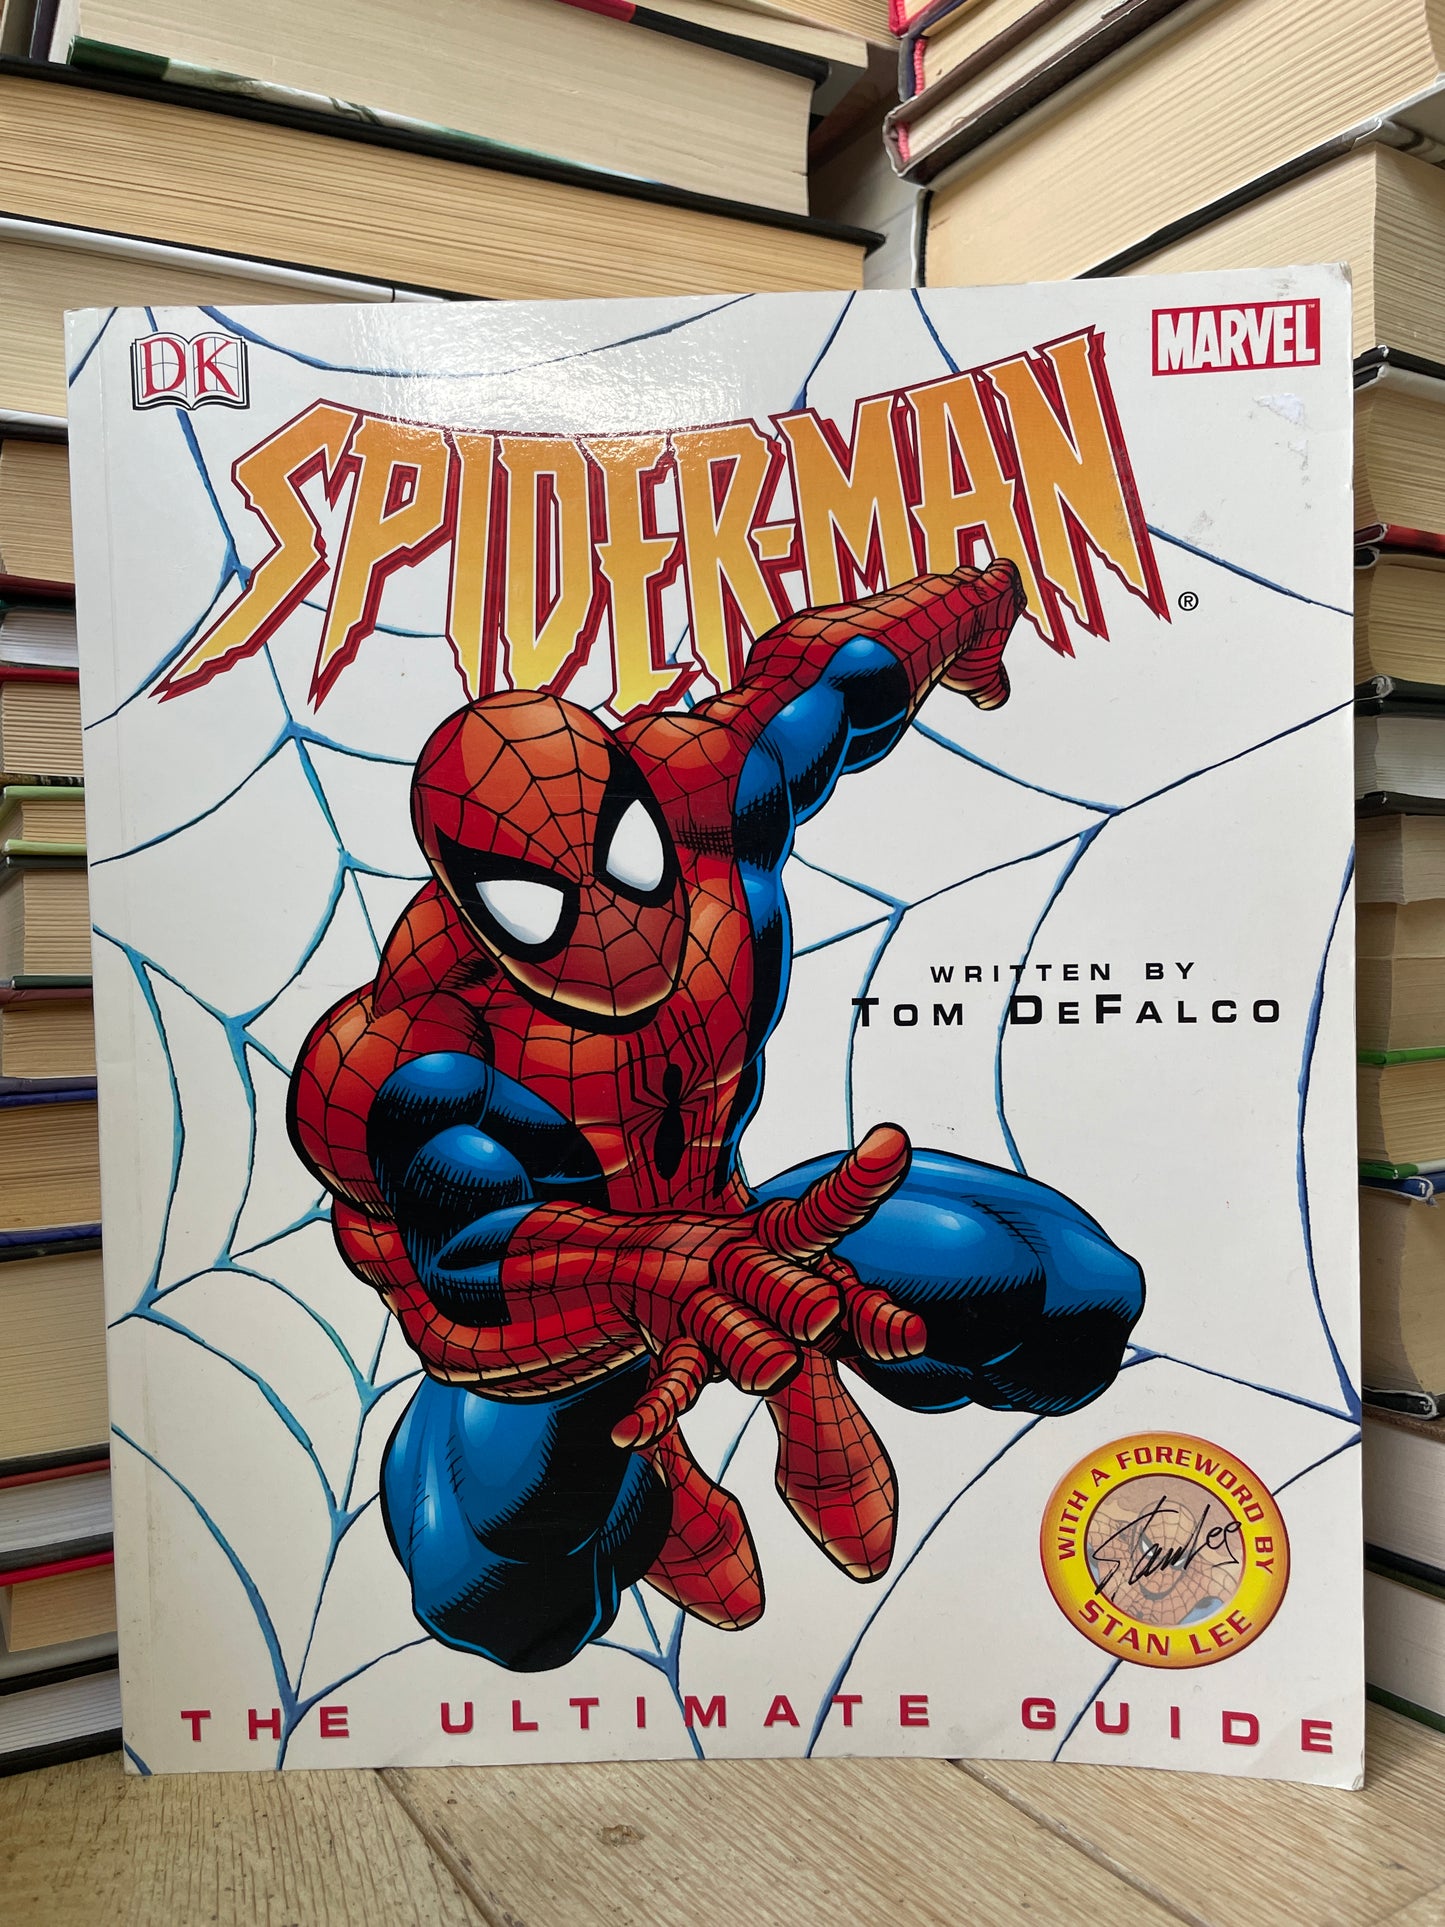 Tom DeFalco - Spiderman: The Ultimate Guide